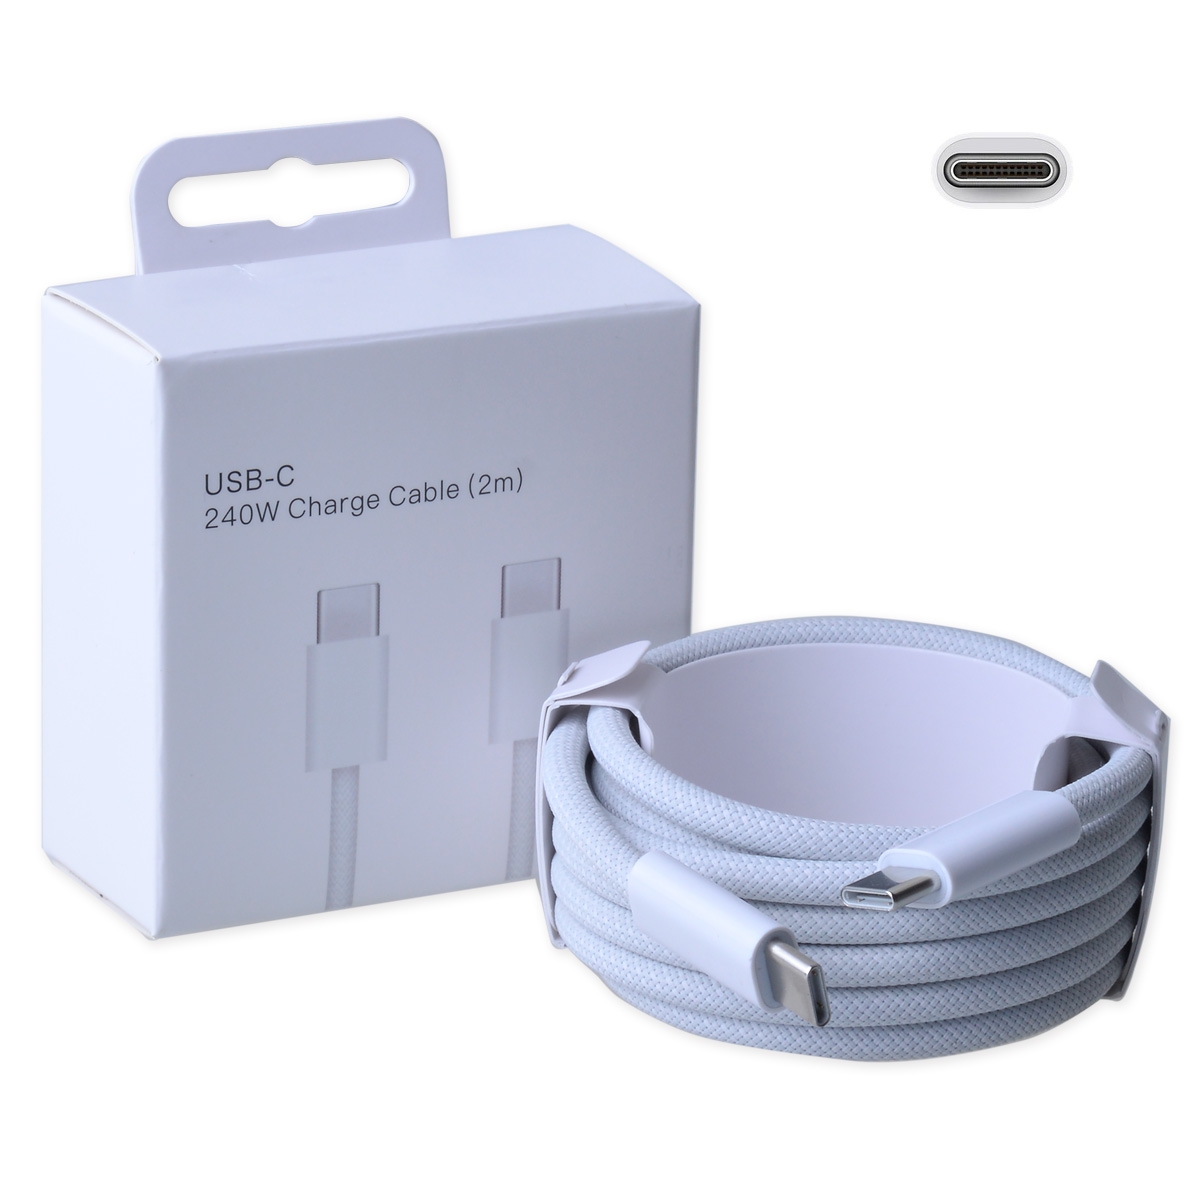 2m Type C Woven Charge Cable (240W) - White